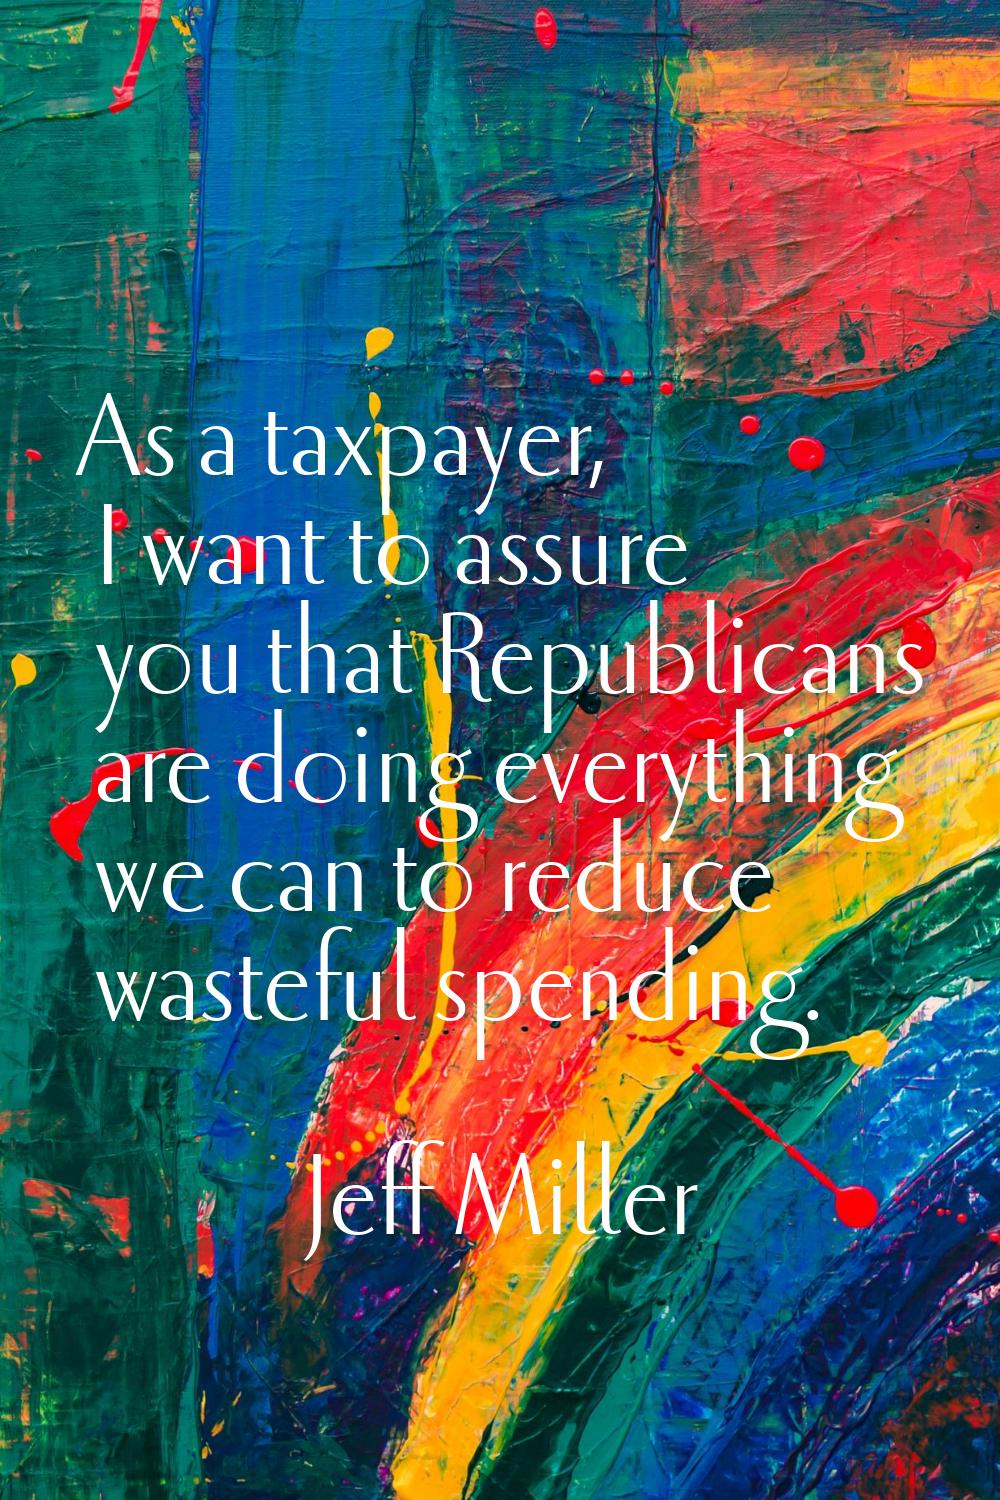 As a taxpayer, I want to assure you that Republicans are doing everything we can to reduce wasteful